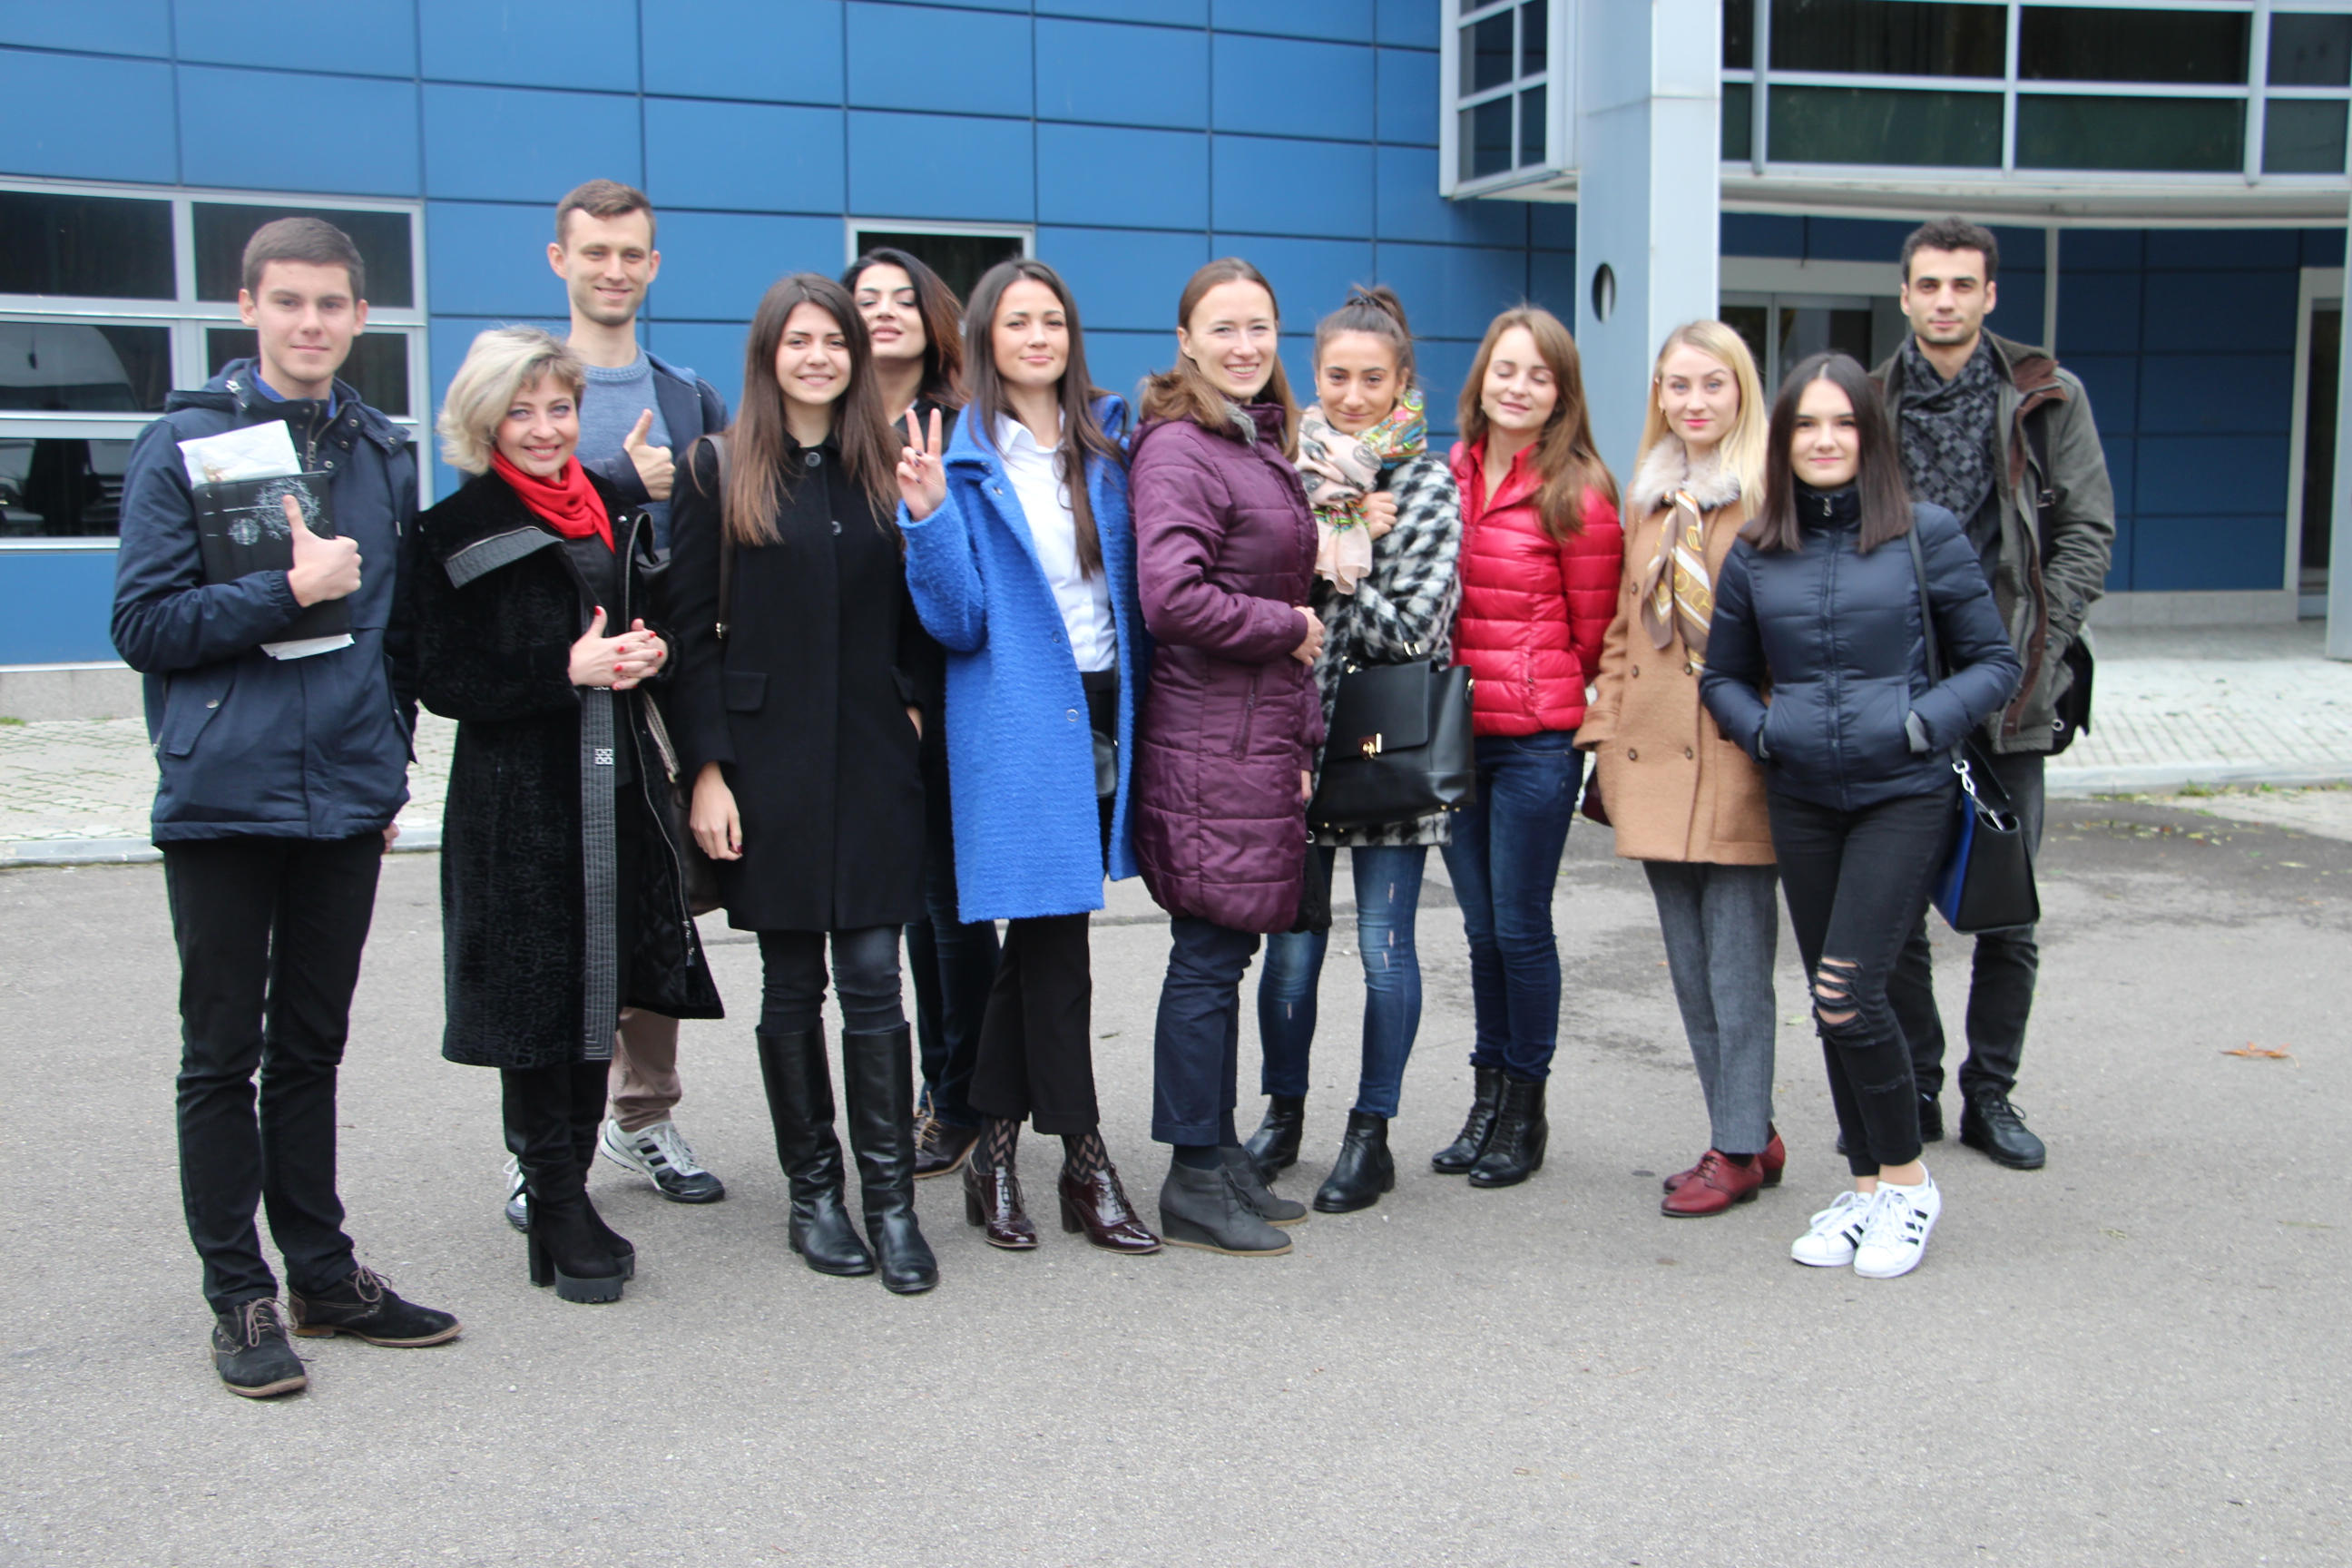 For the second time, SAJ students visited journalists in Romania